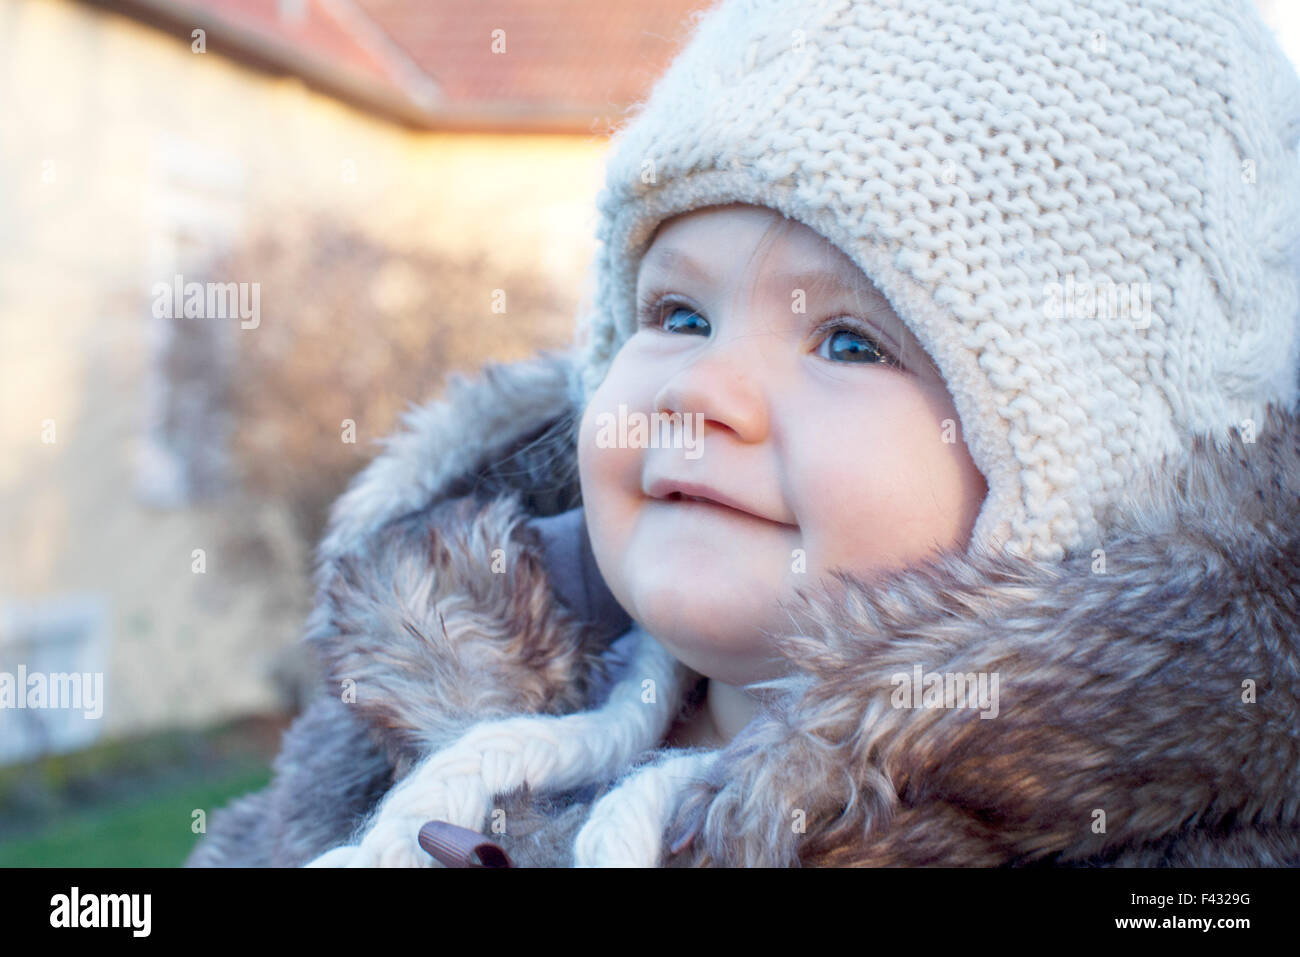 Baby wearing knit hat outdoors, portrait Stock Photo